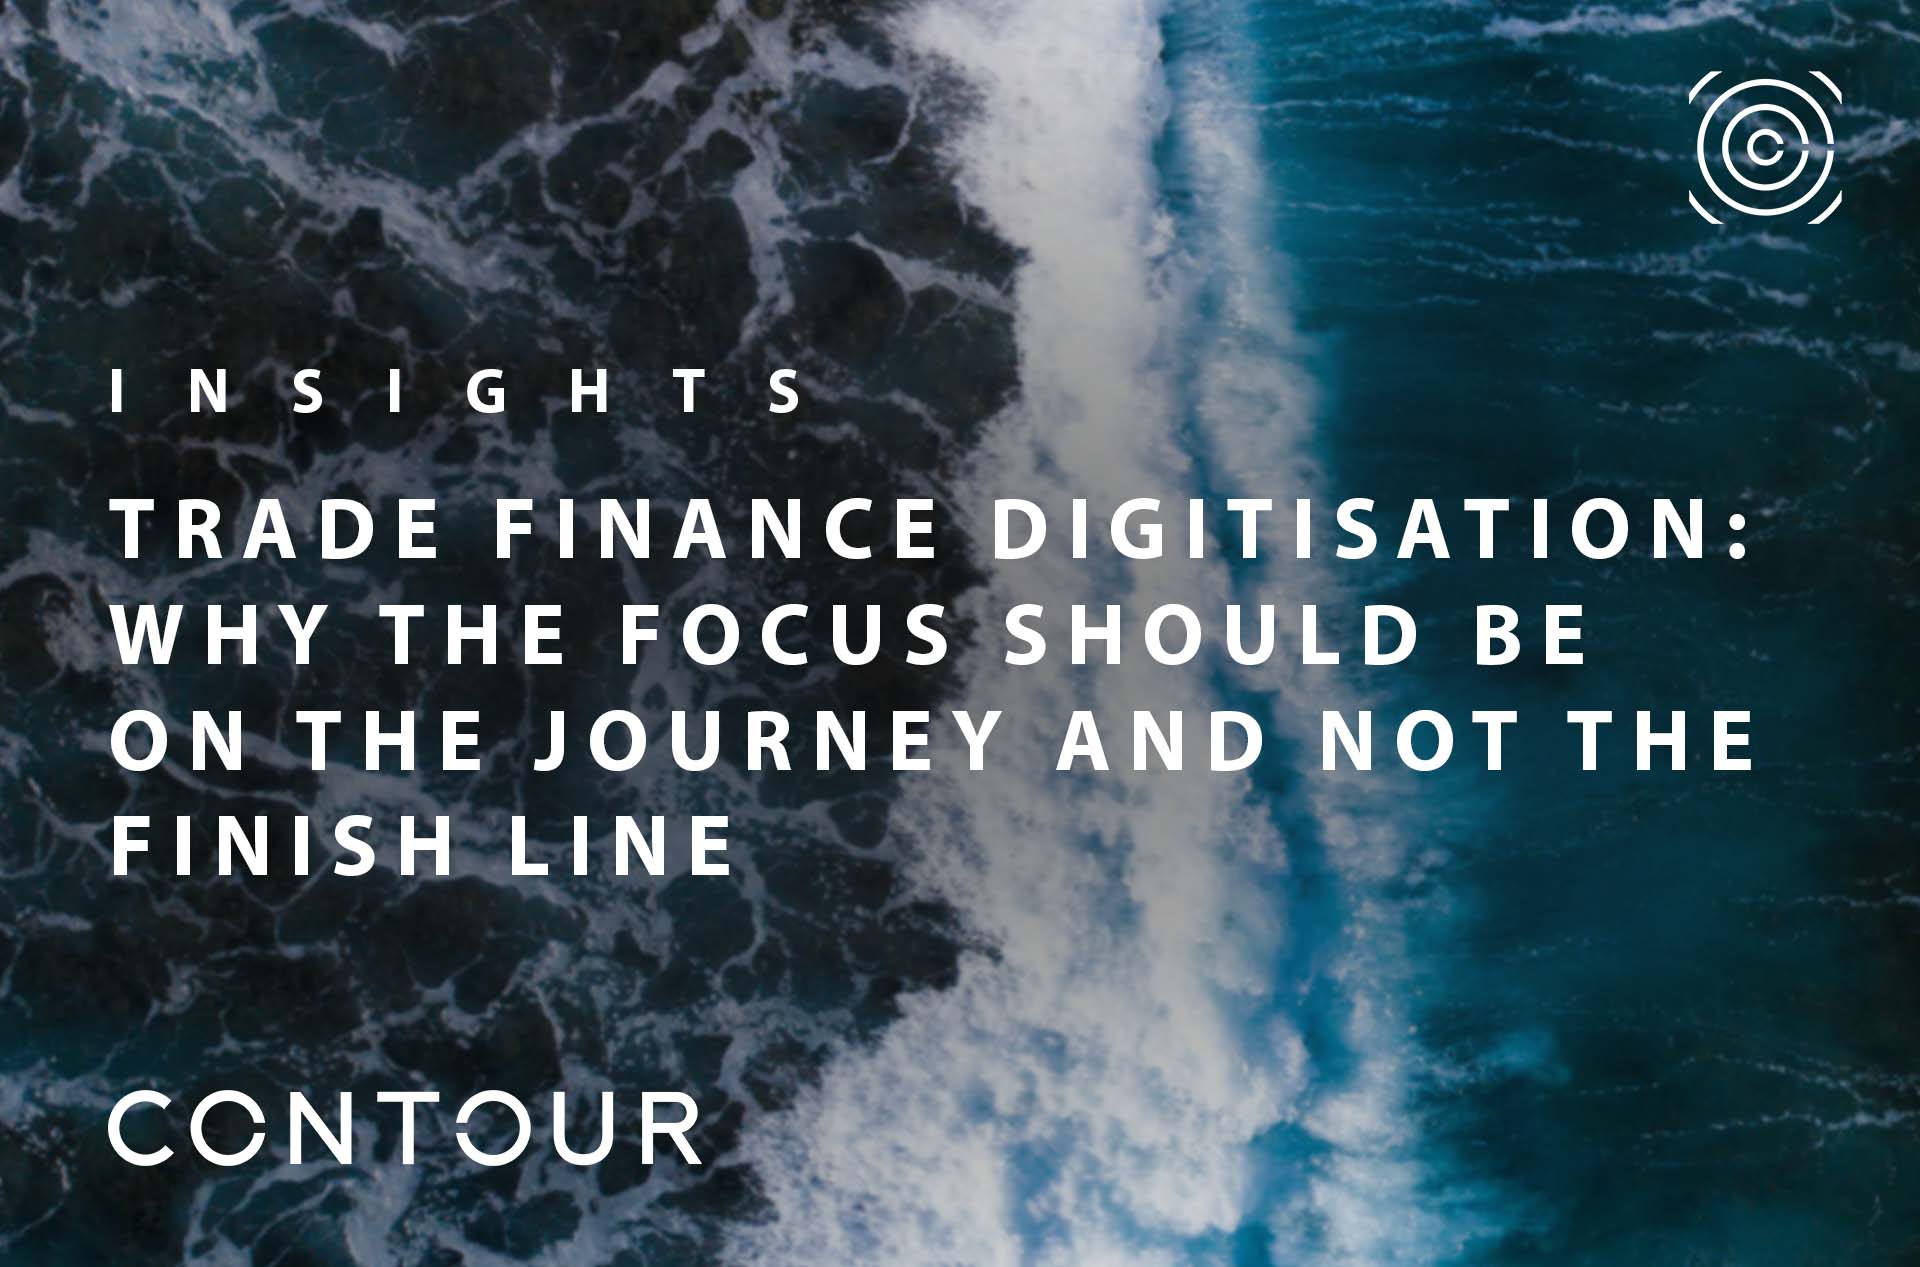 Trade finance digitisation: Why the focus should be on the journey and not the finish line